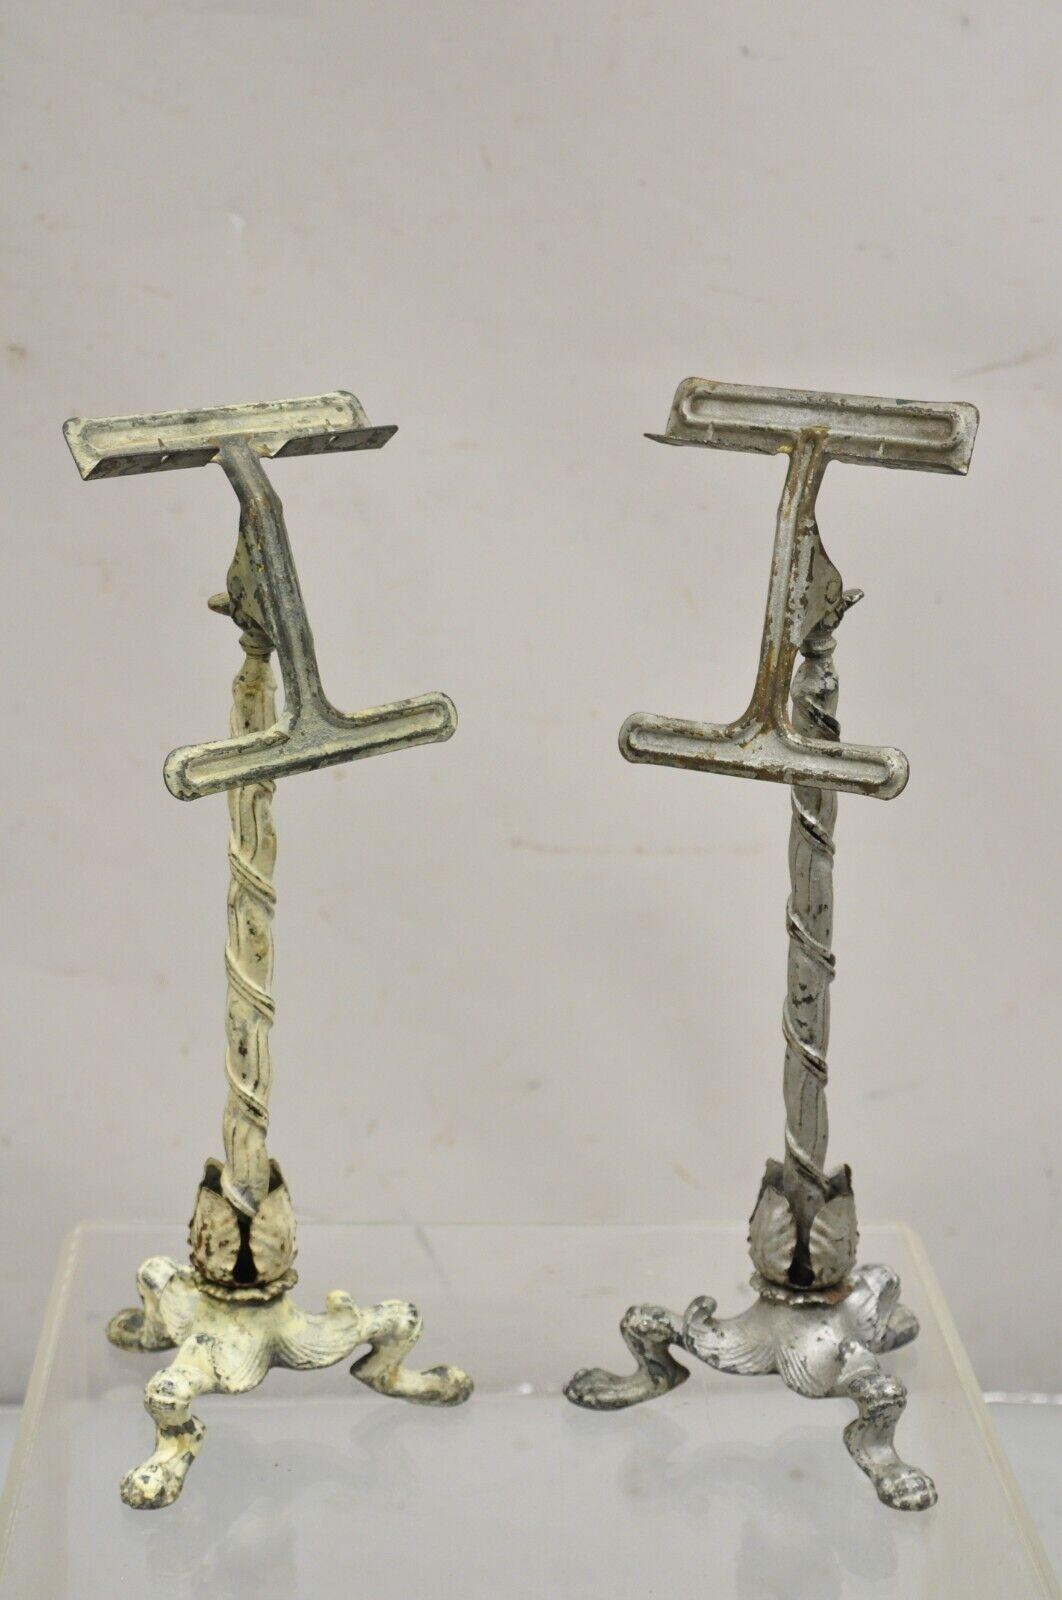 Antique Victorian Cast Iron Tripod Paw Feet General Store Retail Display Stands - a Pair. Item features a pivoting easel, distressed painted finish, very unique antique stands. Circa 19th Century. Measurements: 16.5